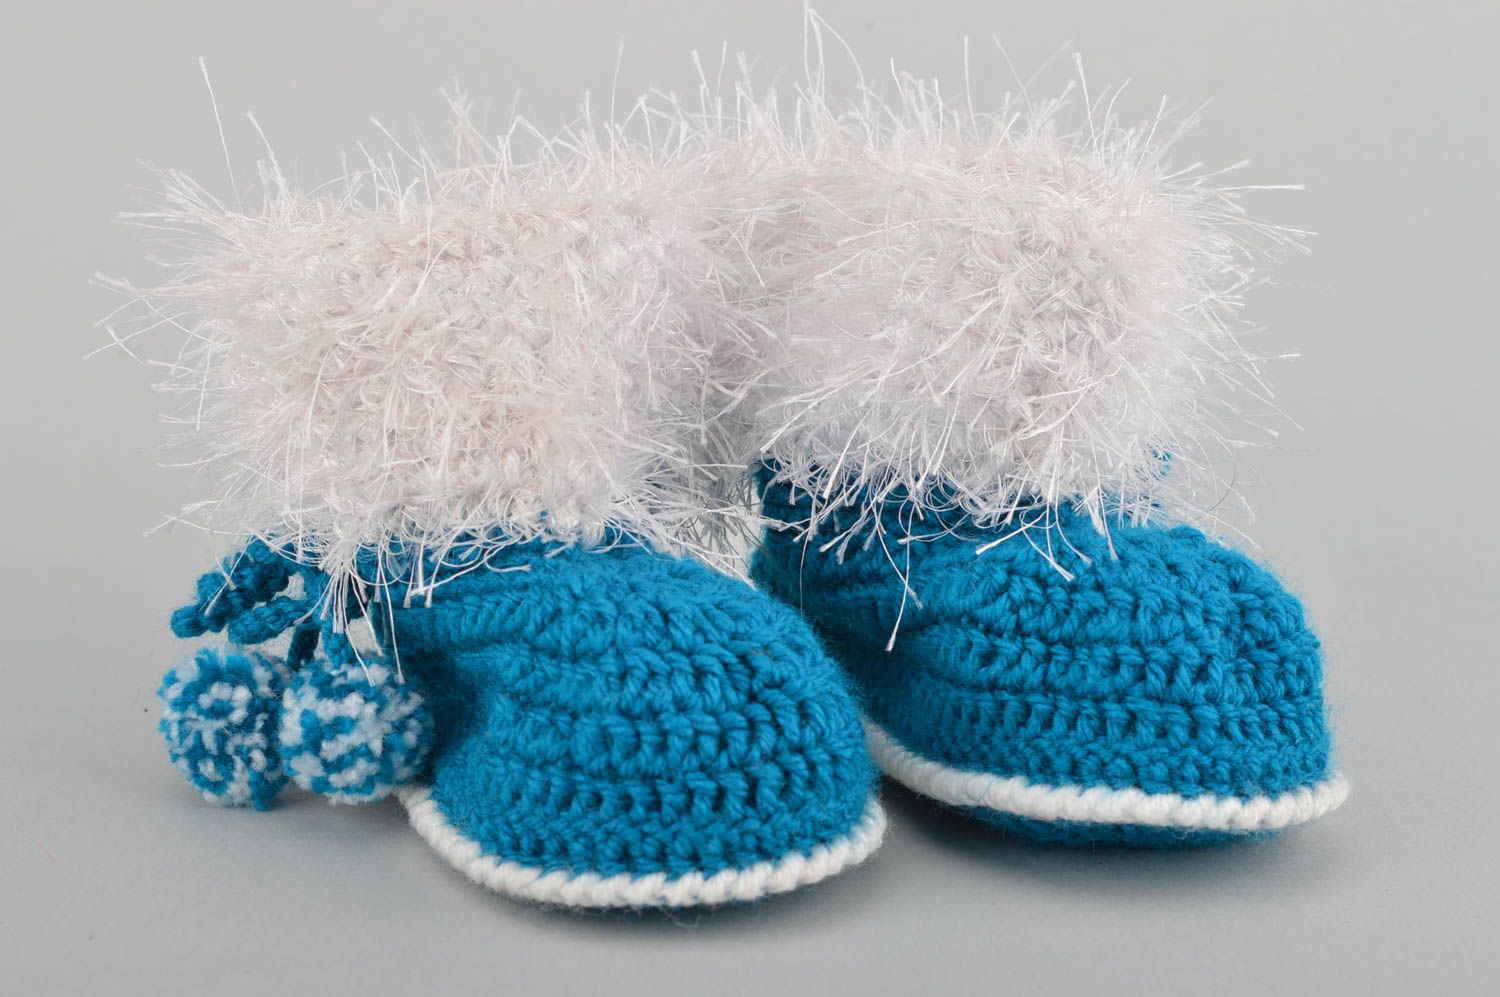 Handmade beautiful blue crocheted baby bootees made of cotton for boys photo 2